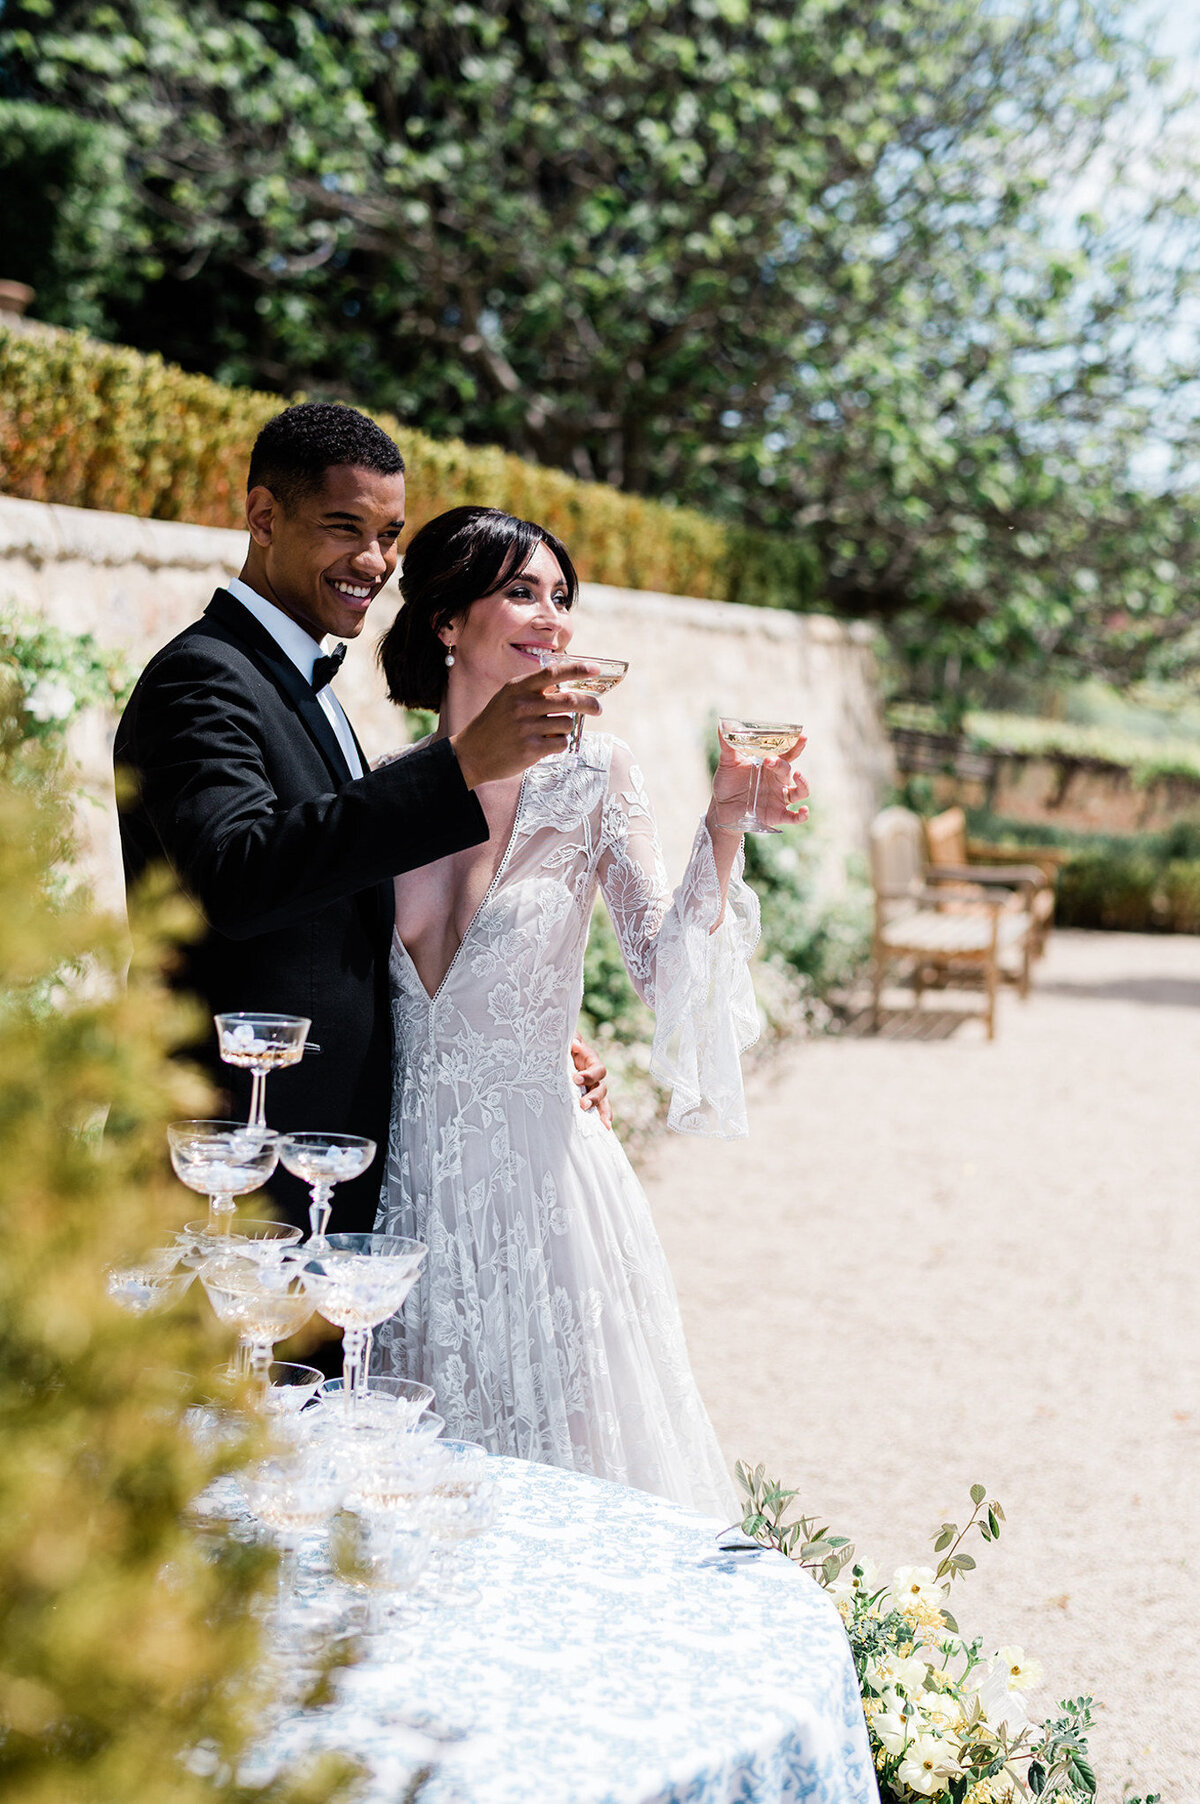 Elevate your wedding experience with the sophistication of fine art aesthetics in France. Amidst romantic settings, we blend luxury and artistry to capture your love's essence in every frame.